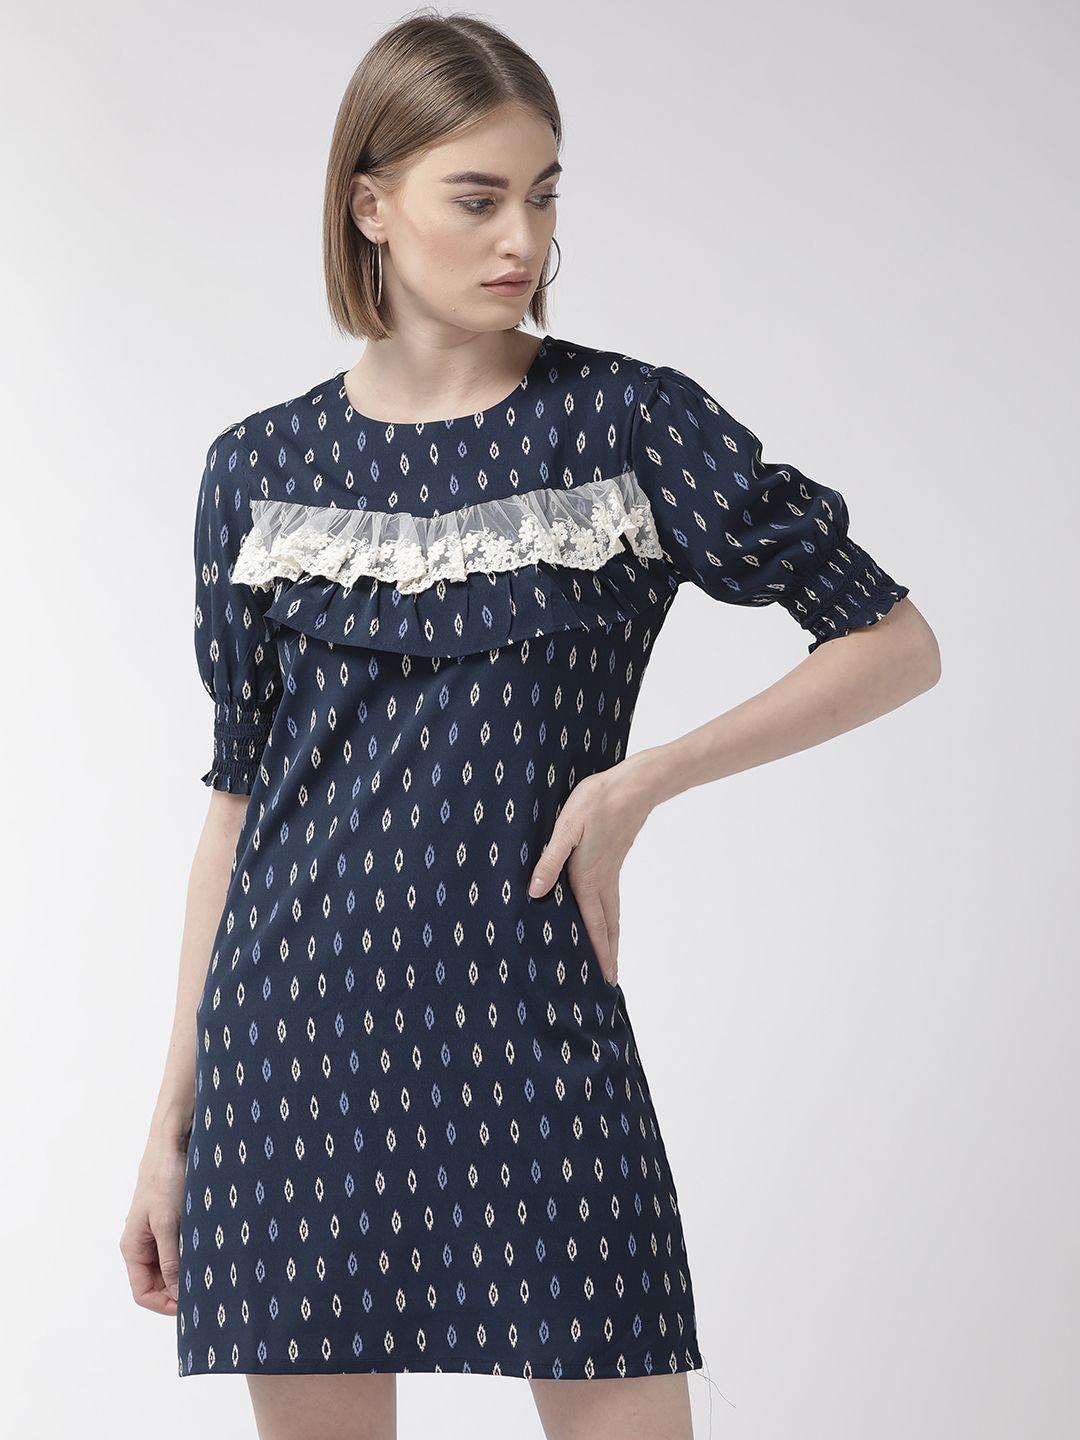 style-quotient-women-navy-blue-&-white-printed-a-line-dress